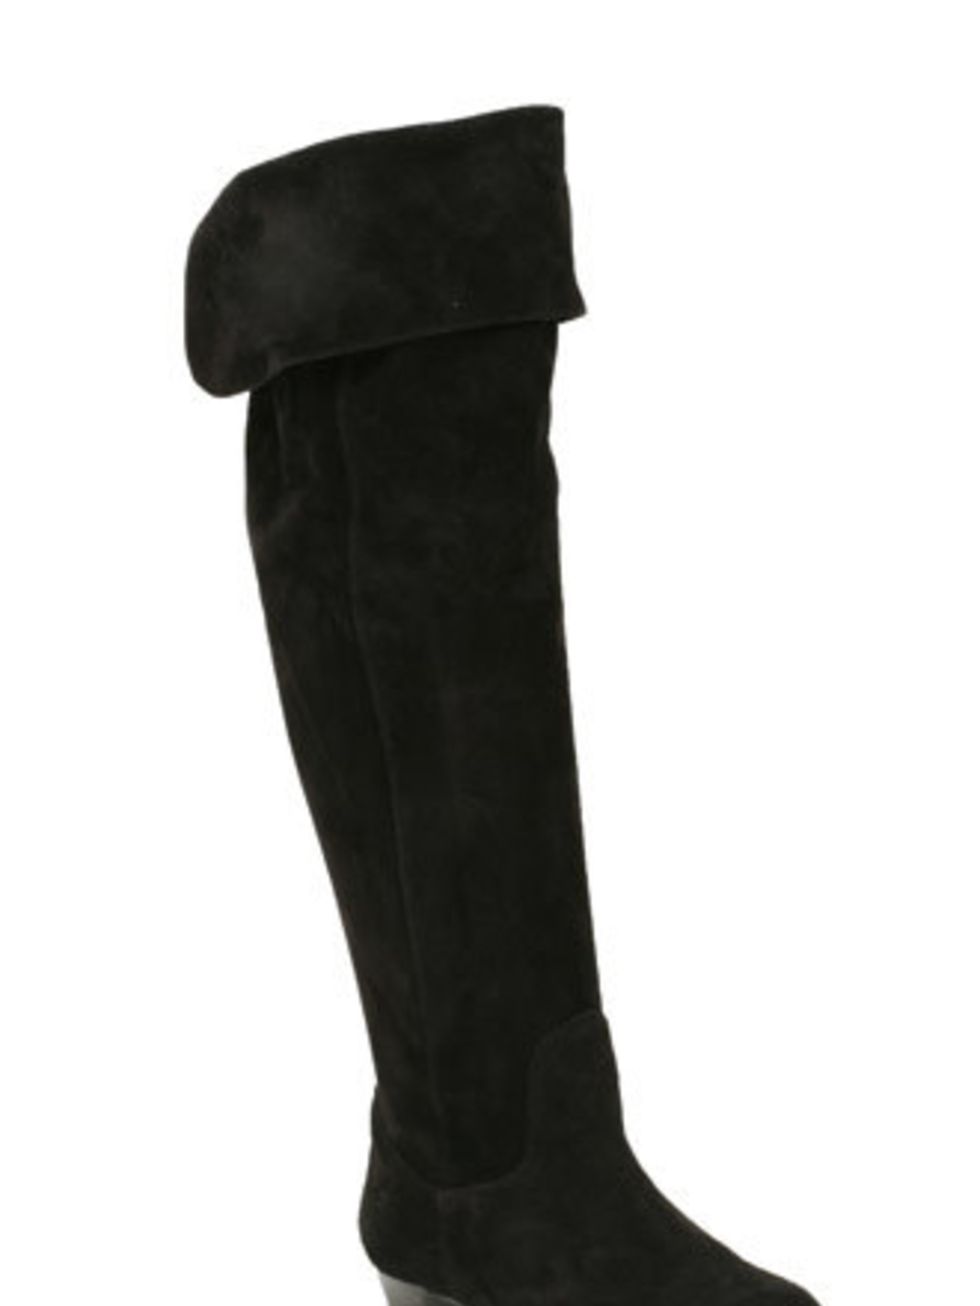 <p>Cover your tracks with these over-the-knee boots. If the OTK trend ends up in the fashion graveyard, this Clarks pair - with its ingenious turn-over, could pass as knee-highs in a flash.</p><p>Boots, £99.99 by <a href="http://www.clarks.co.uk/find/New